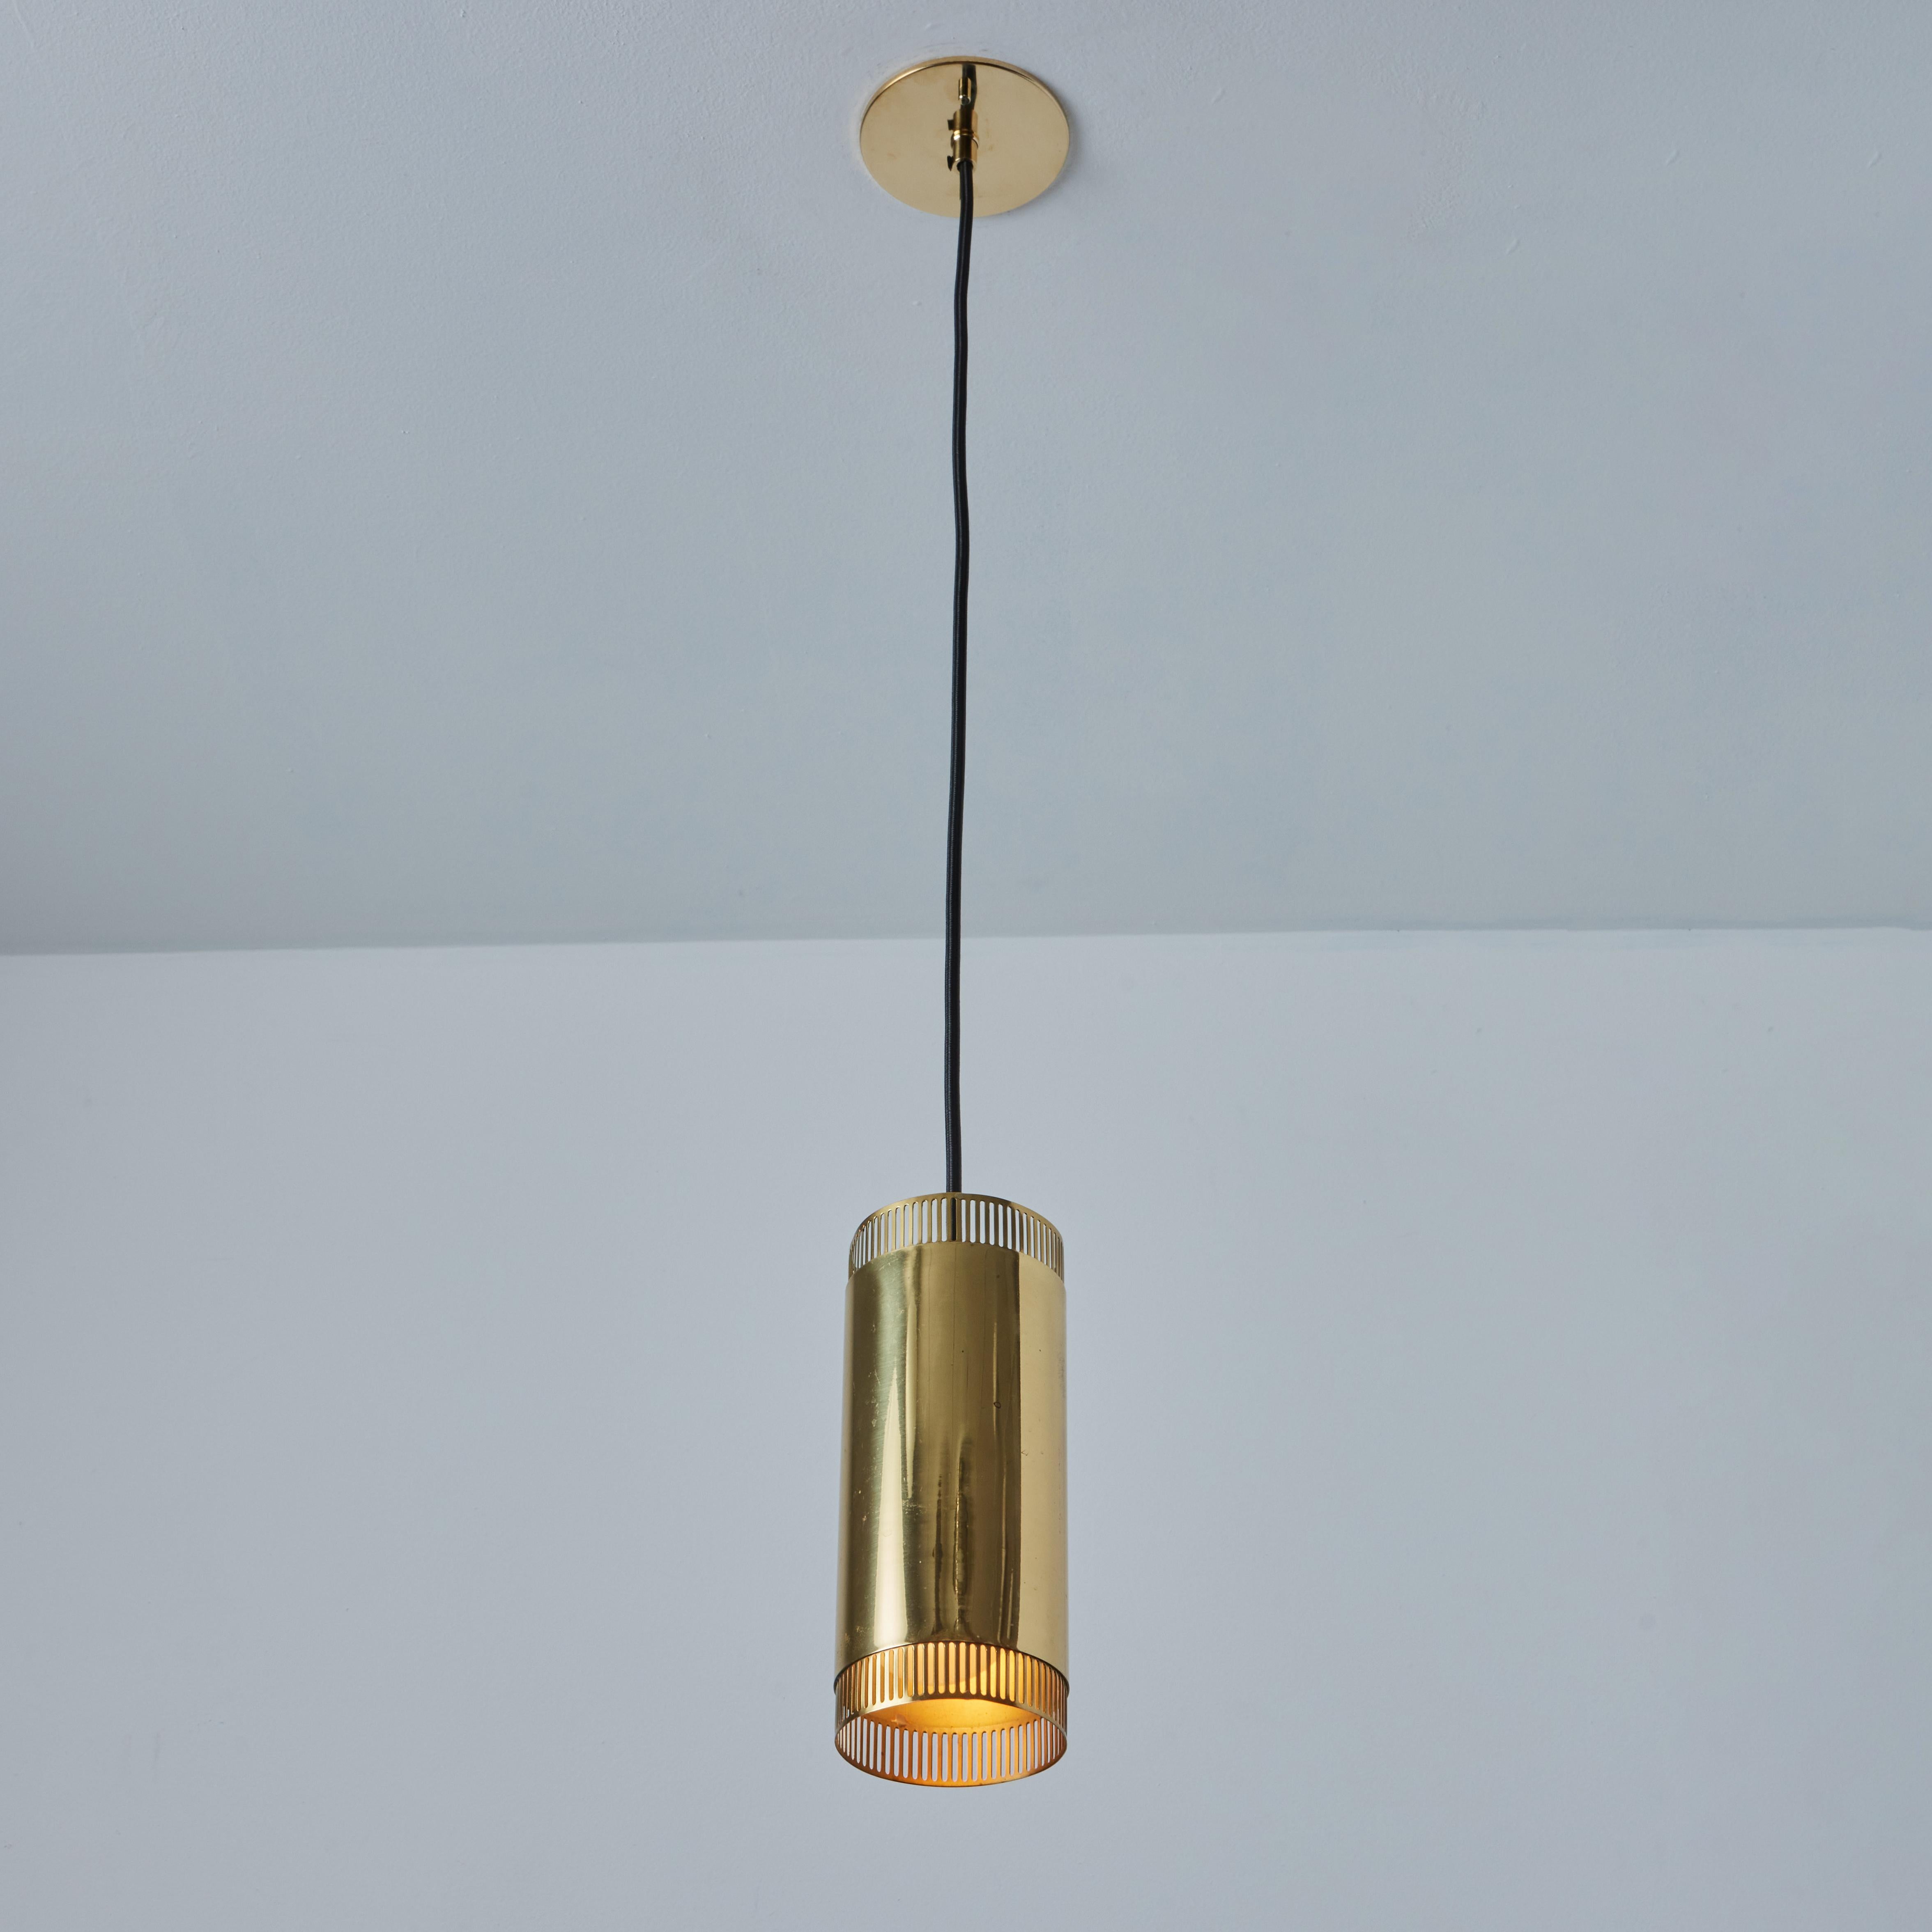 Scandinavian Modern 1960s Perforated Brass Cylindrical Pendant Attributed to Mauri Almari for Idman For Sale